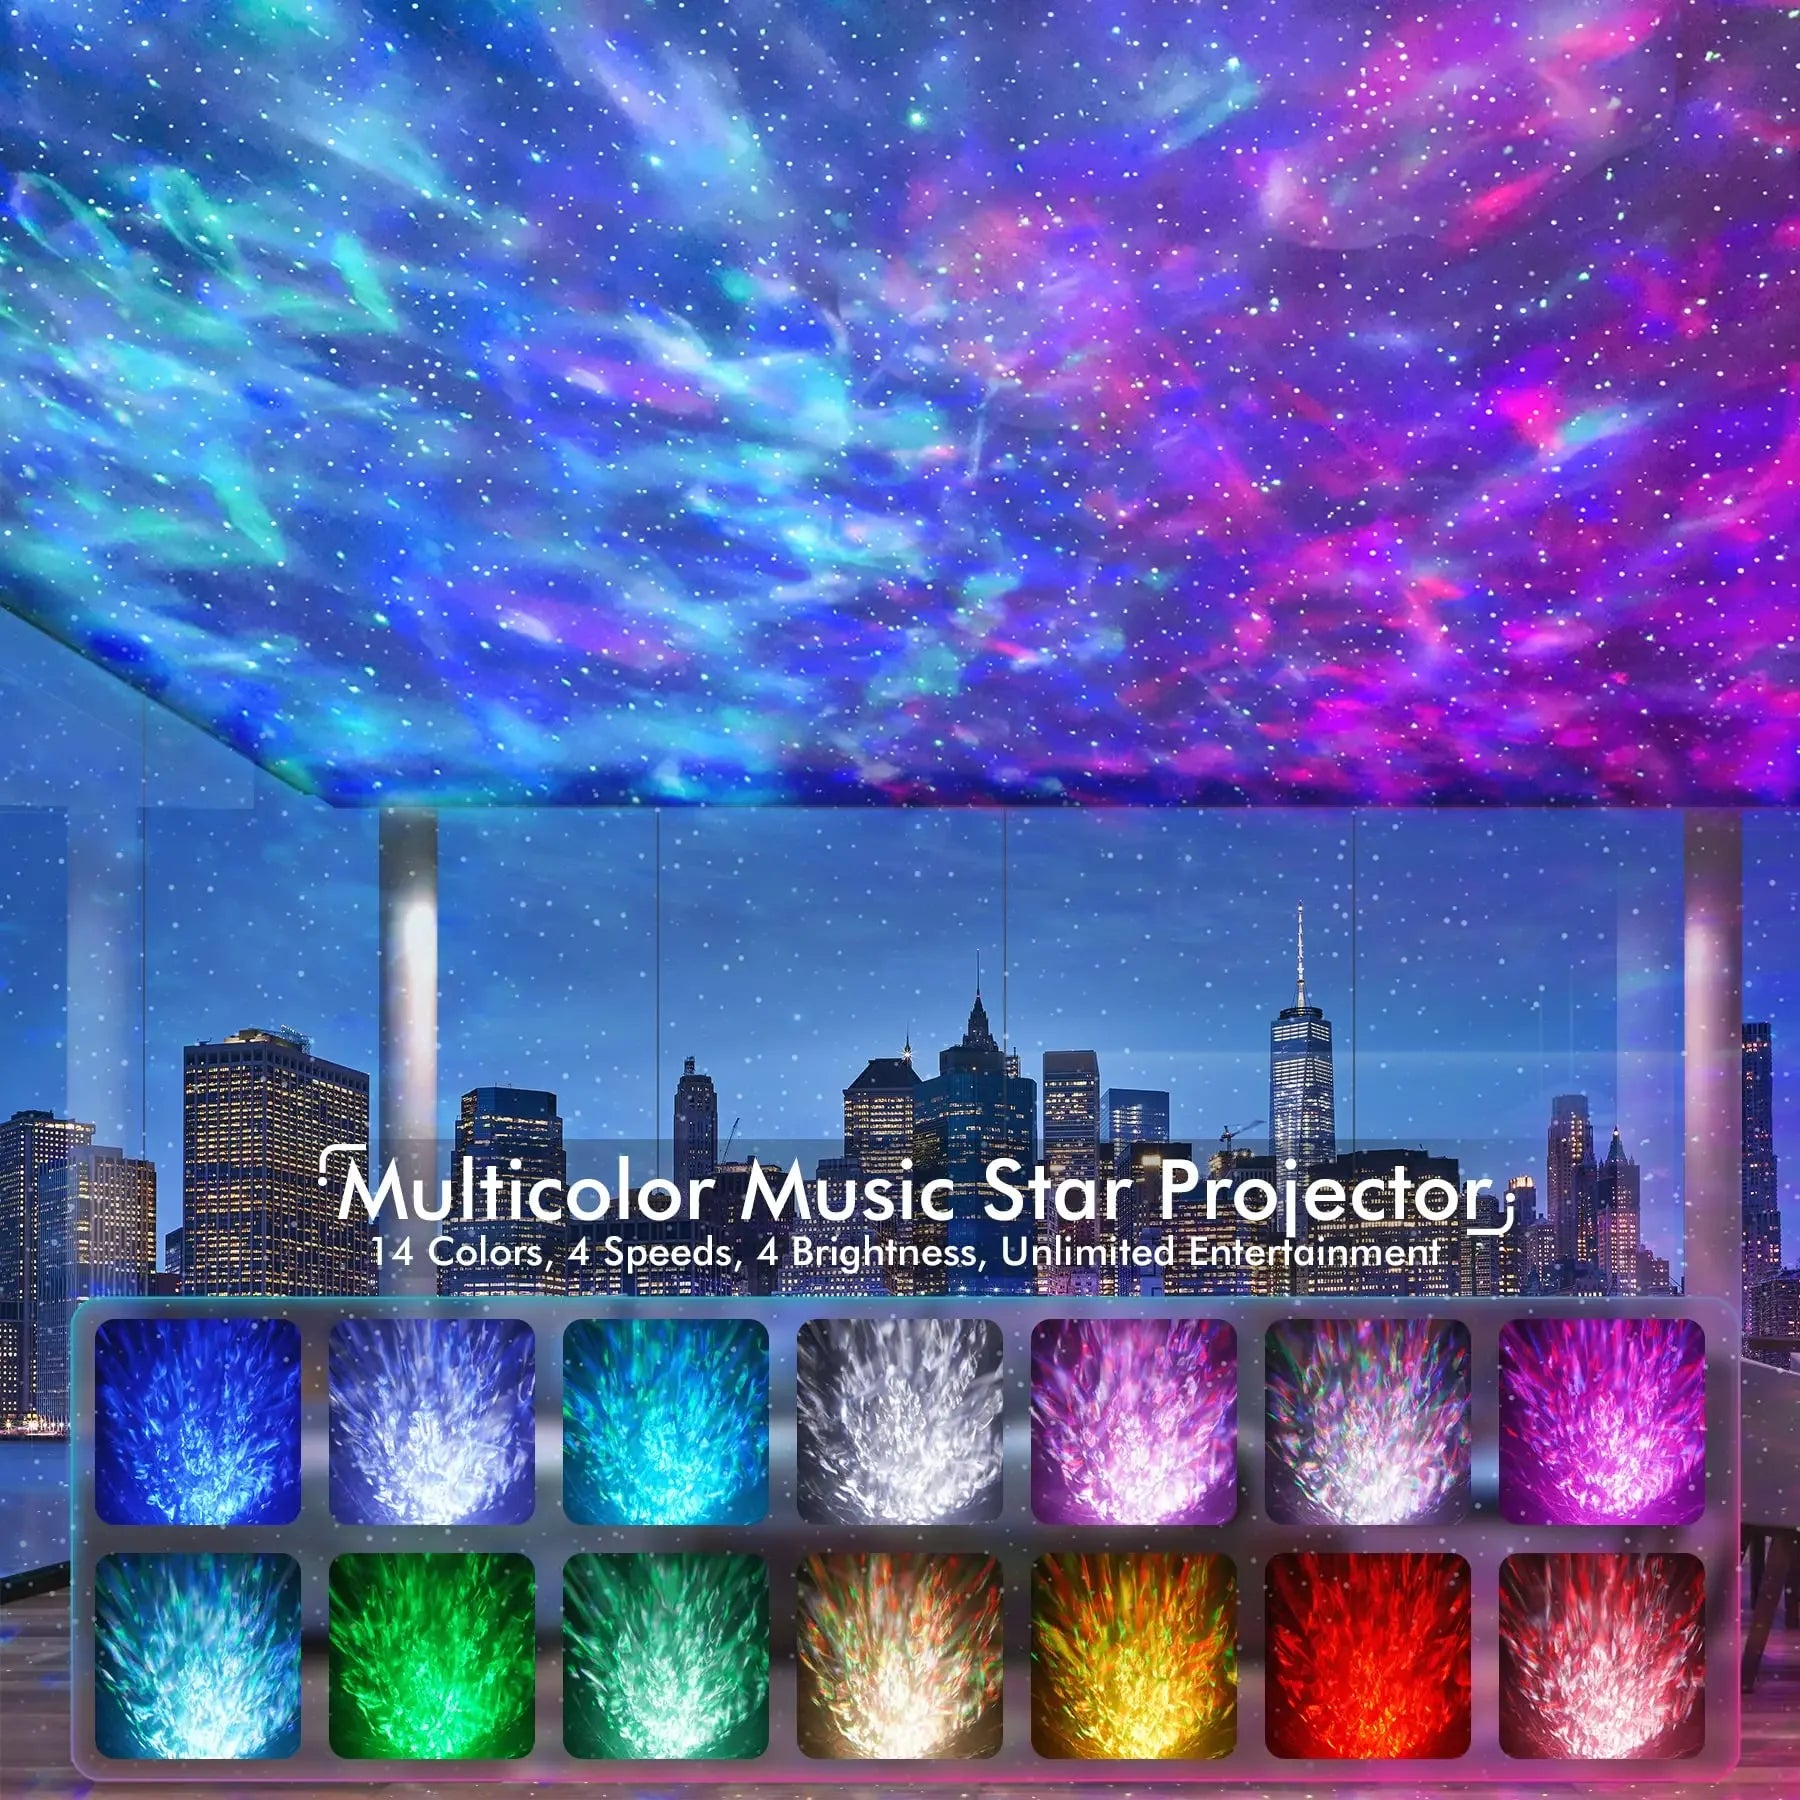 Dinosaur Egg Star Galaxy Projector Night Light with Bluetooth Speaker - 14 Colors LED & Remote Control  ourlum.com   